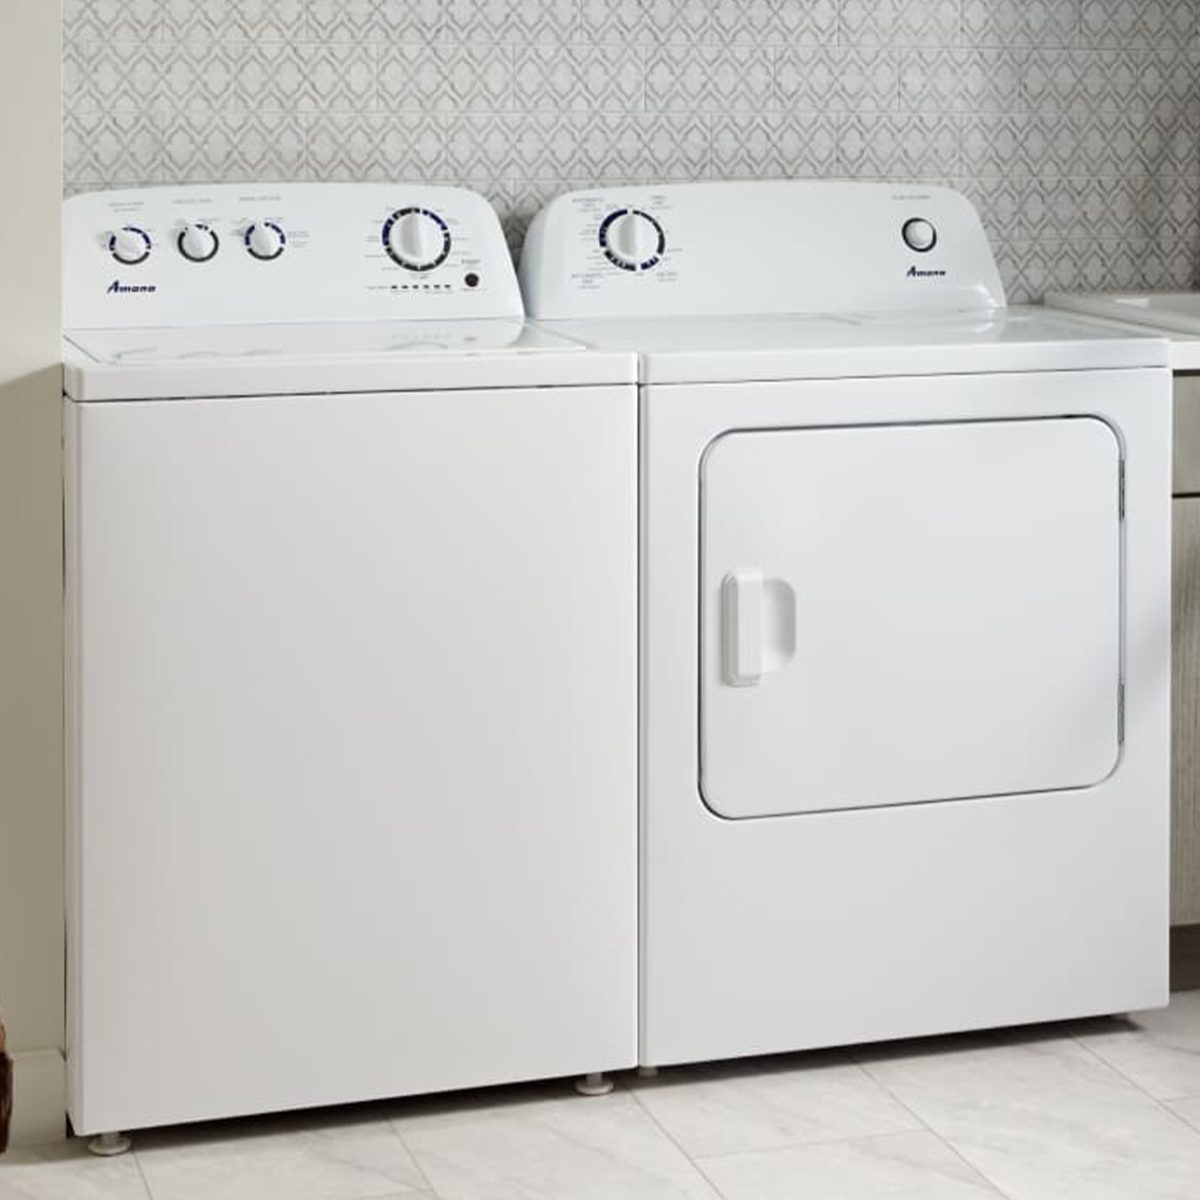 Top-rated & Affordable Washer and Dryer Sets for Every Home